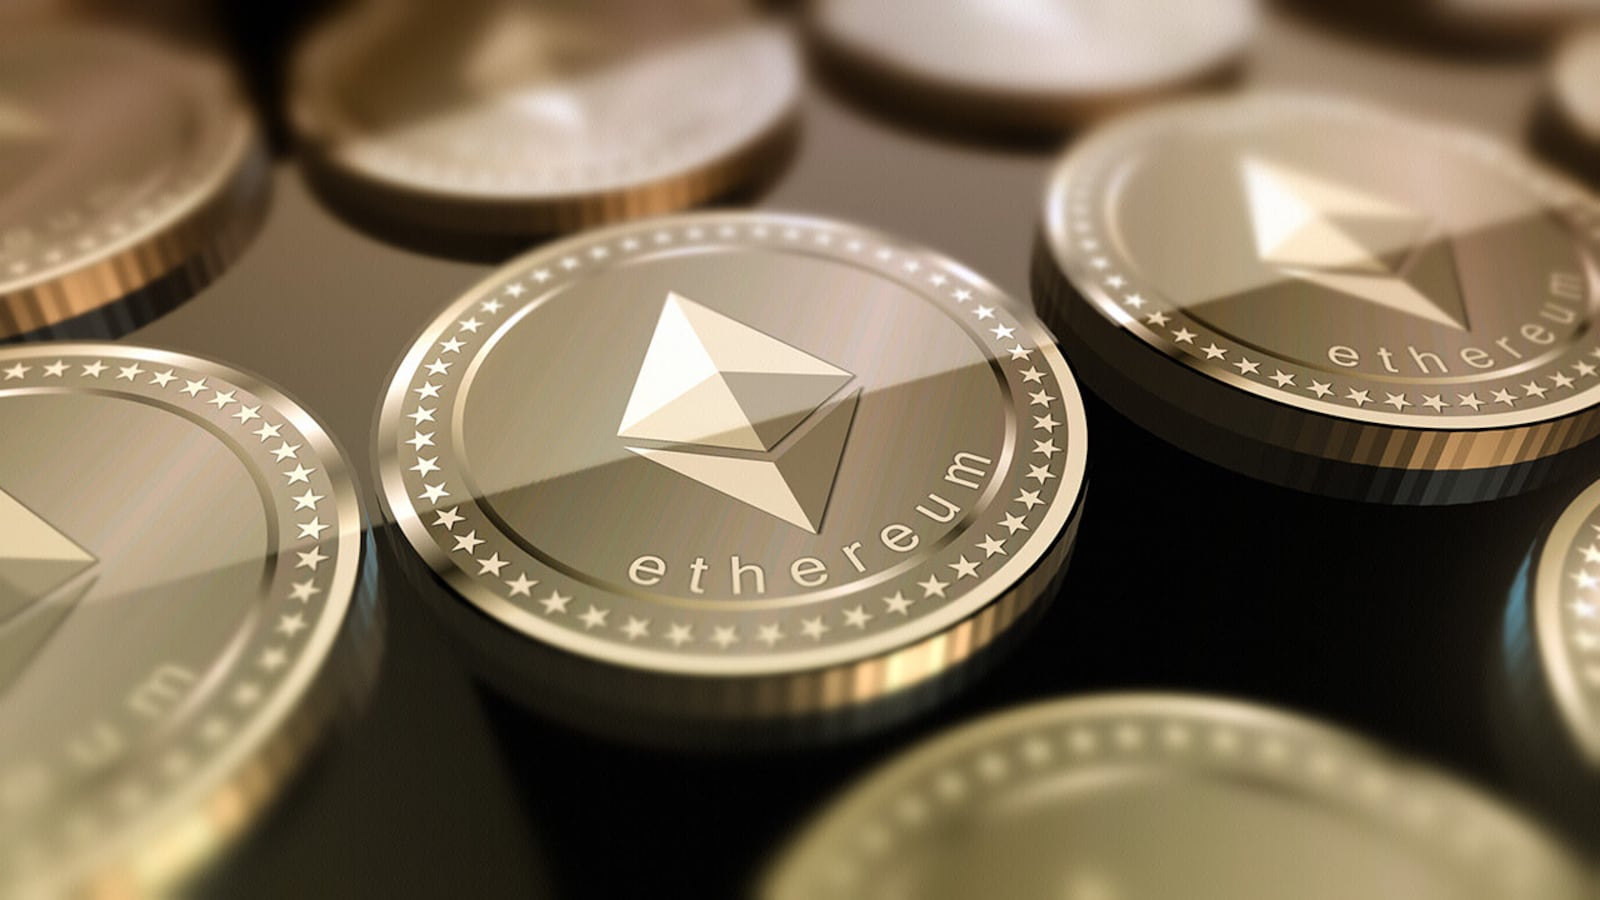 Ethereum speculation forum 3 c 1 formed for the purpose of investing